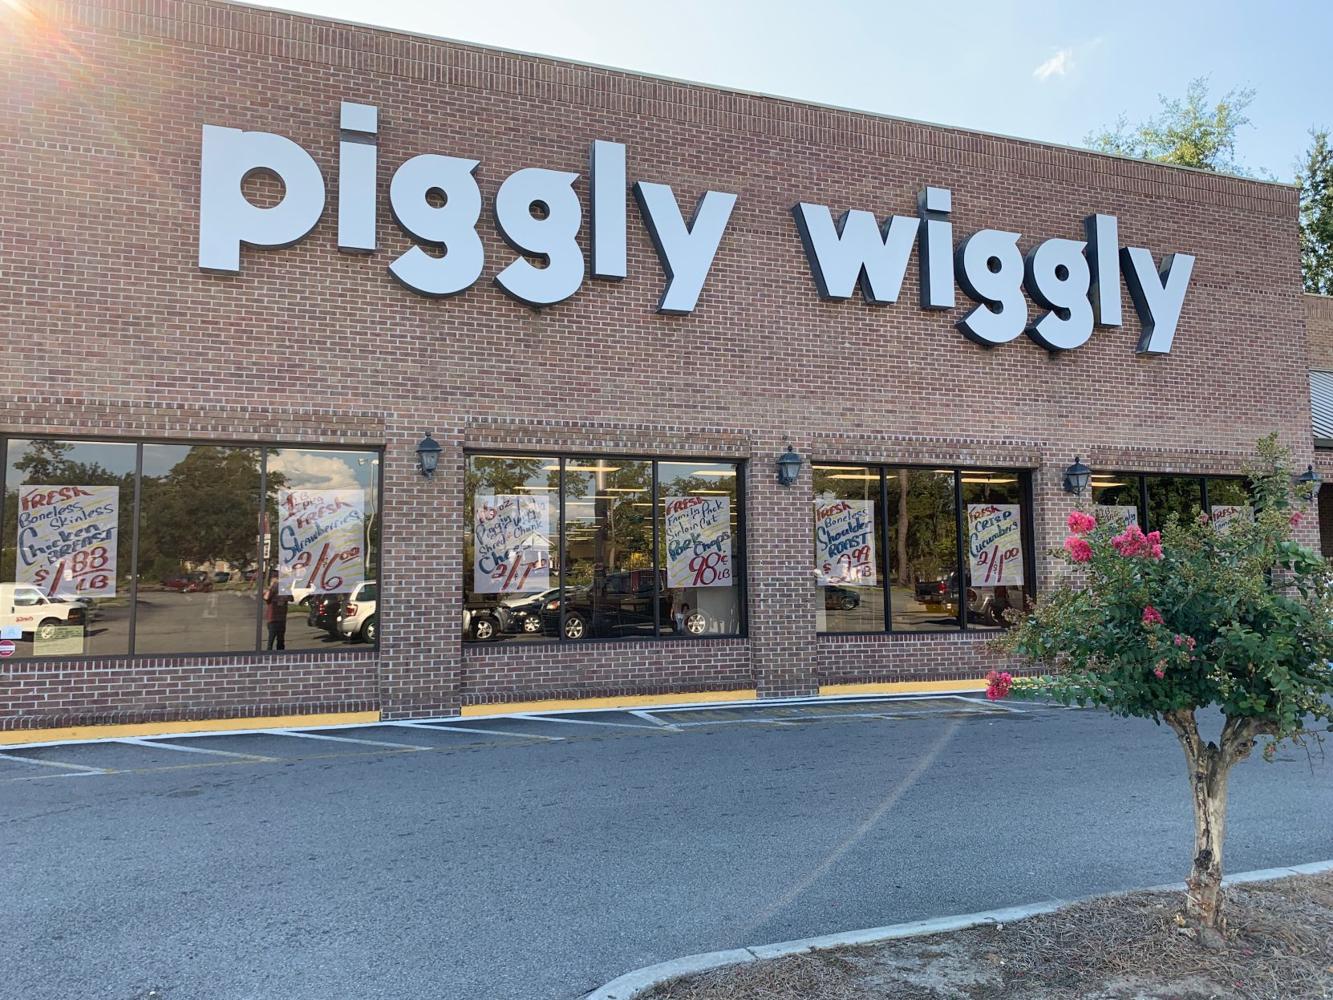 After 37 years, Mr. K's Piggly Wiggly near Charleston disappears after